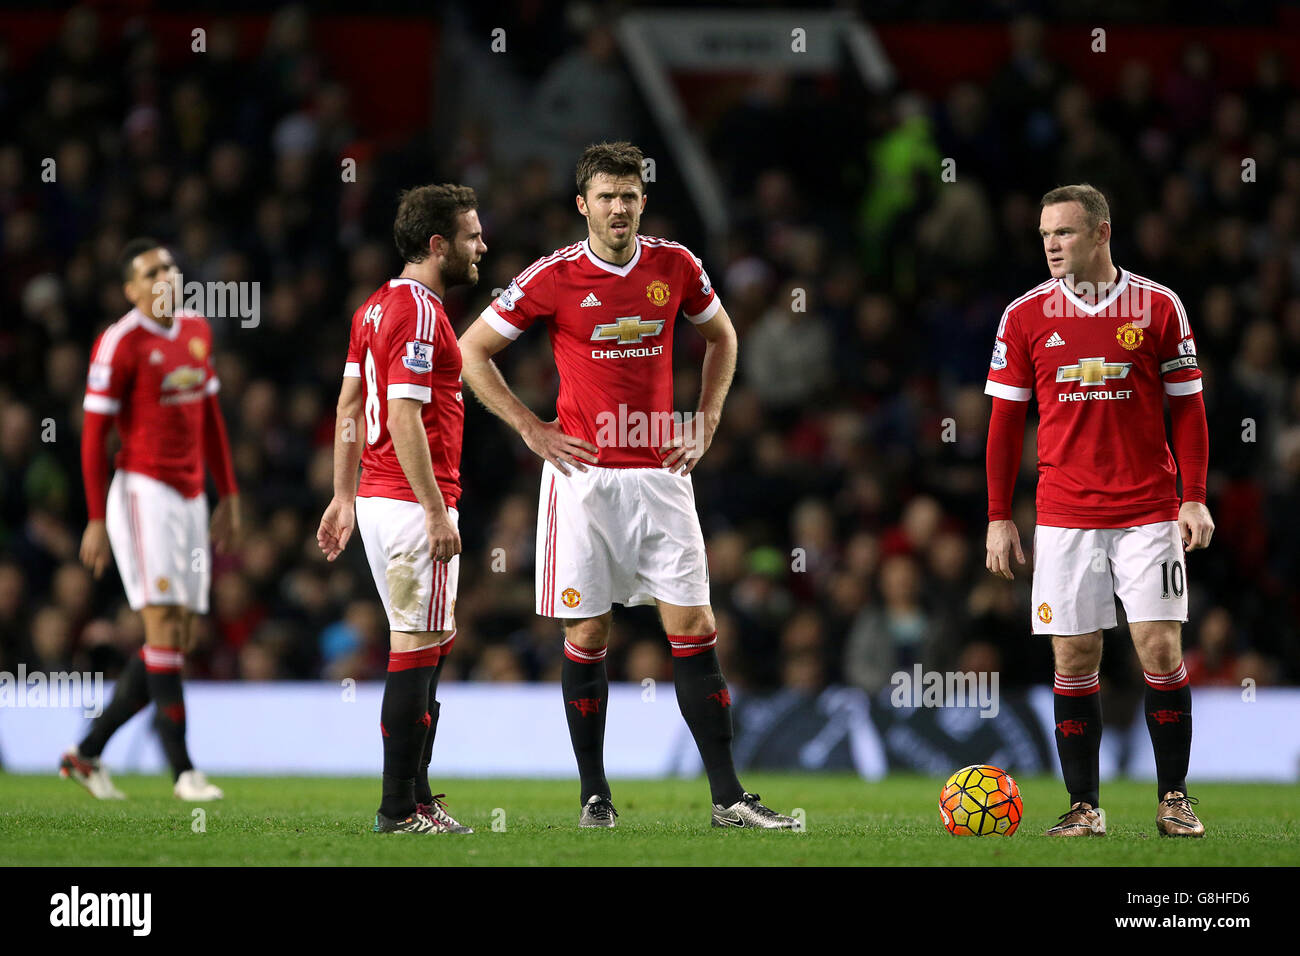 Manchester United v Norwich City - Barclays Premier League - Old Trafford Banque D'Images